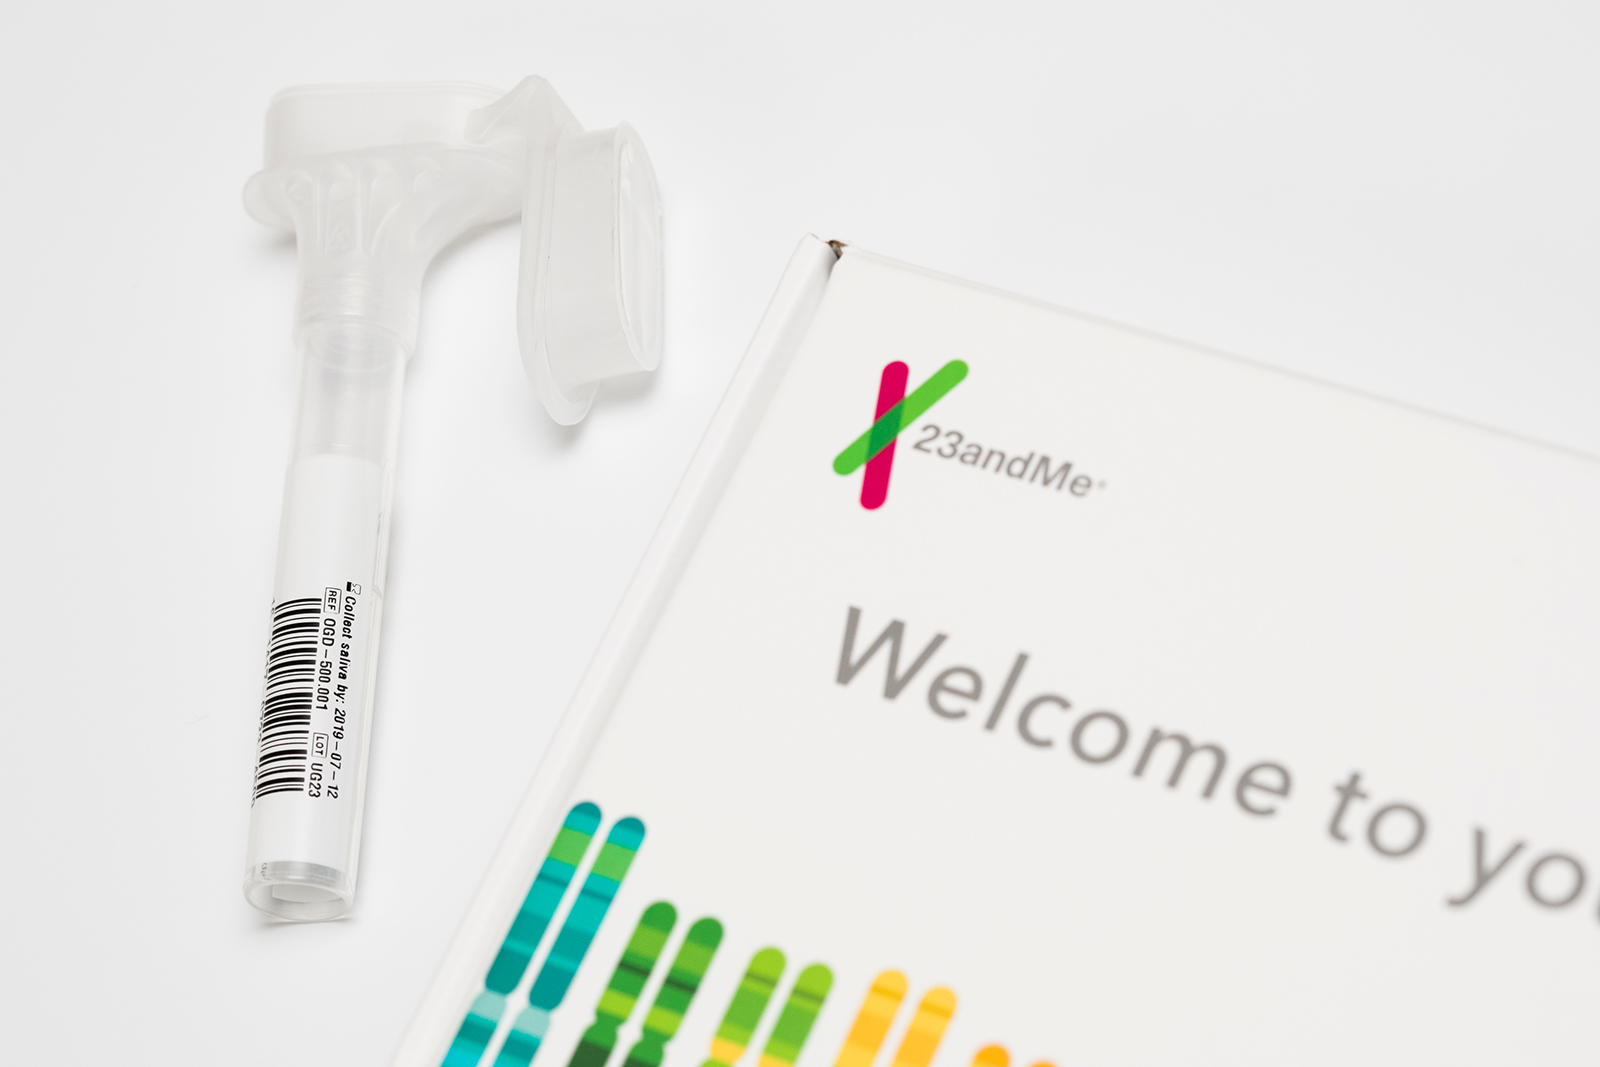 The contents of a 23andMe genetic testing kit as seen in Silver Spring, Maryland, on January 3, 2018. 